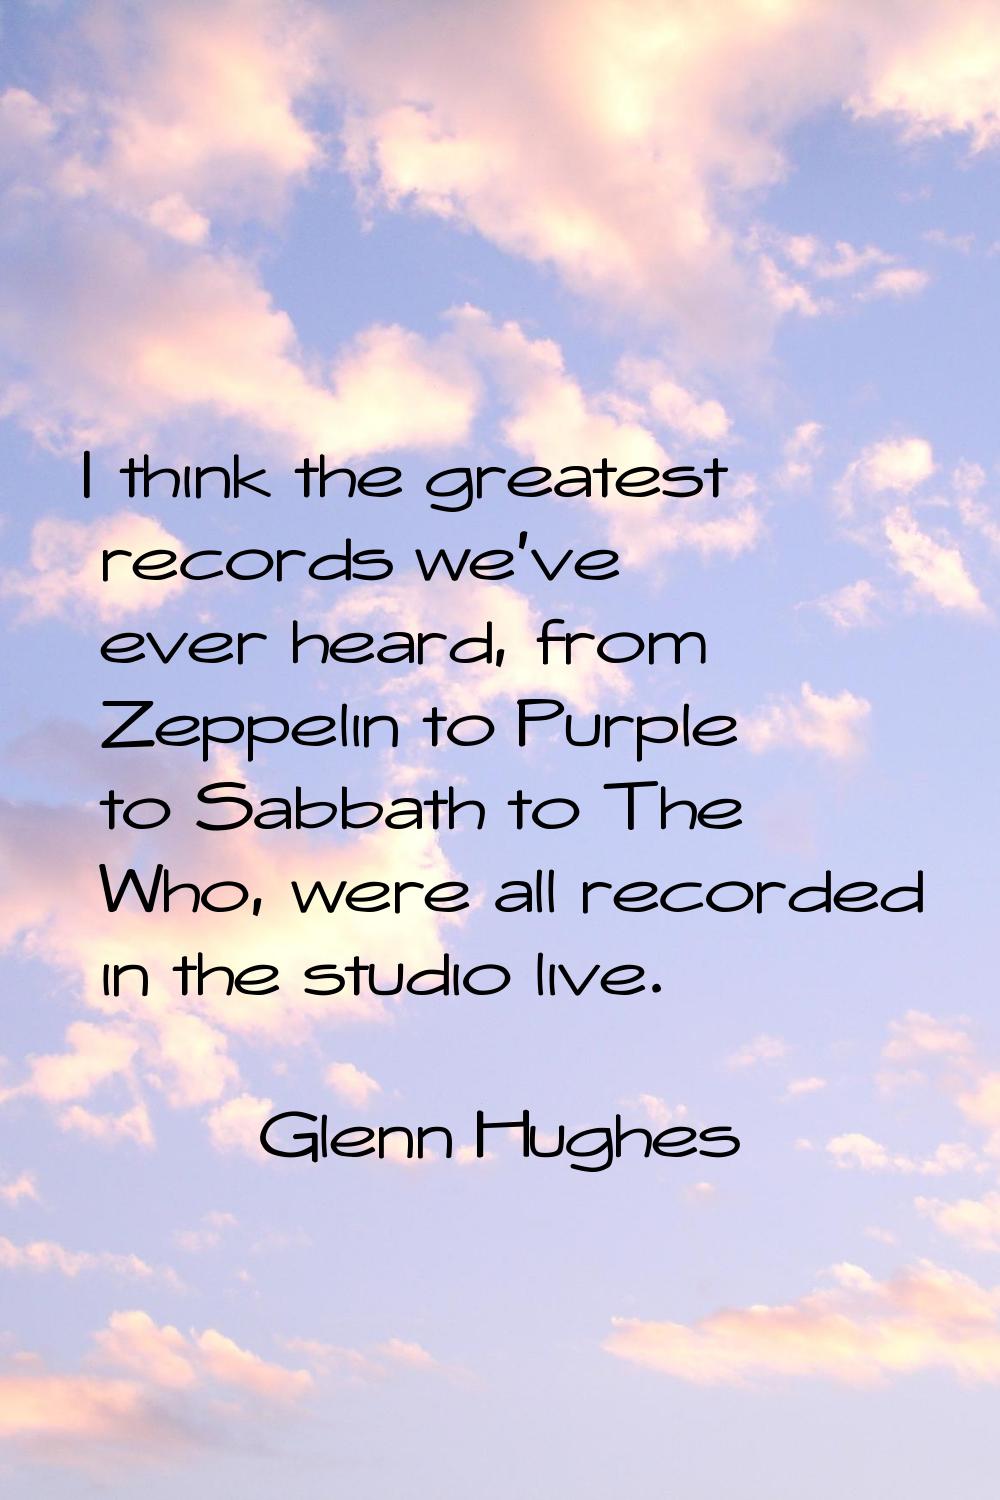 I think the greatest records we've ever heard, from Zeppelin to Purple to Sabbath to The Who, were 